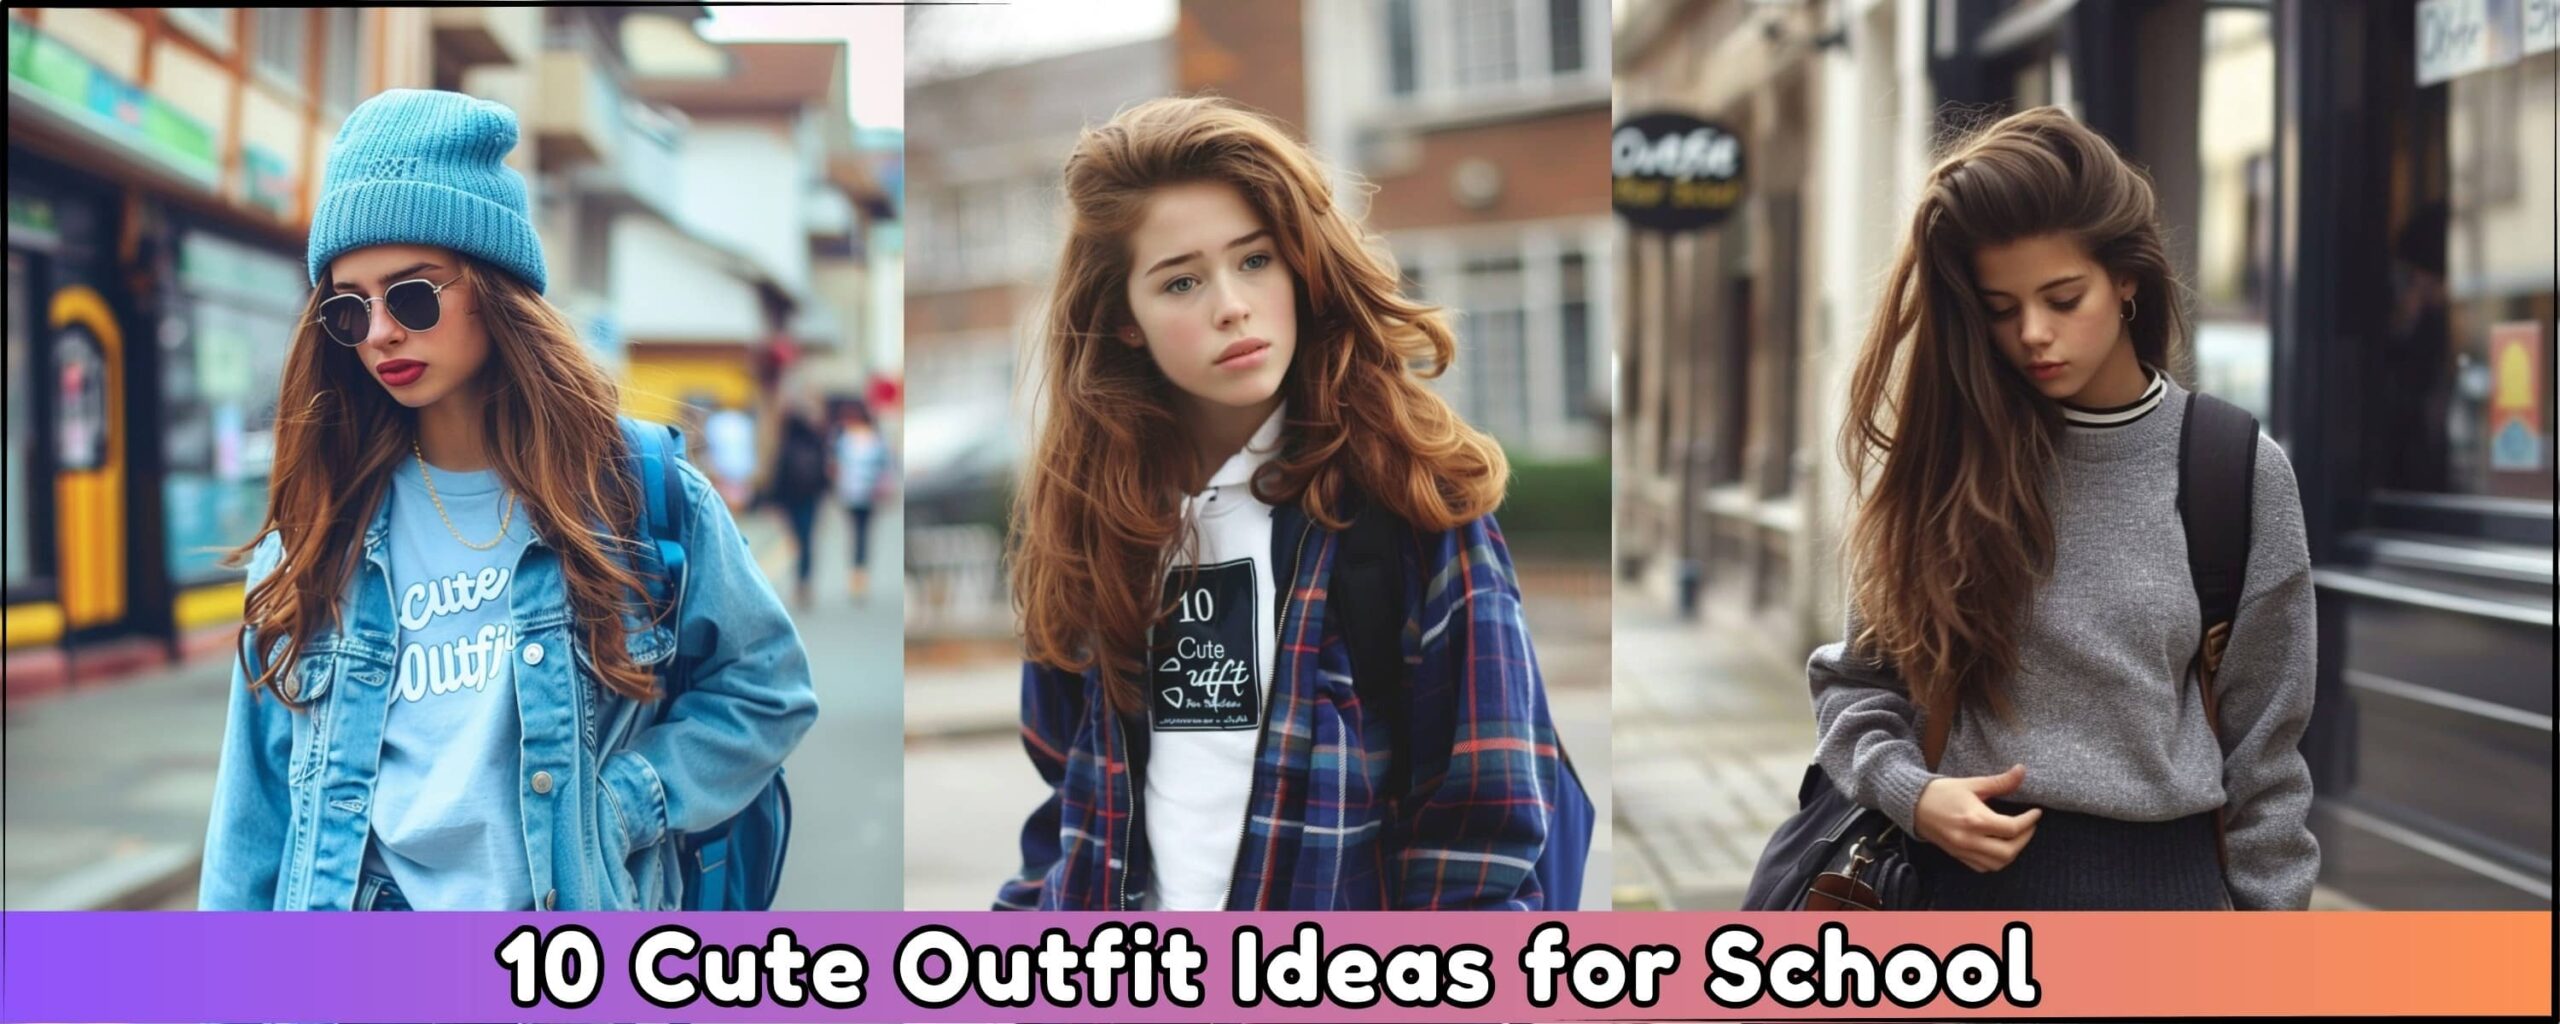 10 Cute Outfit Ideas for School